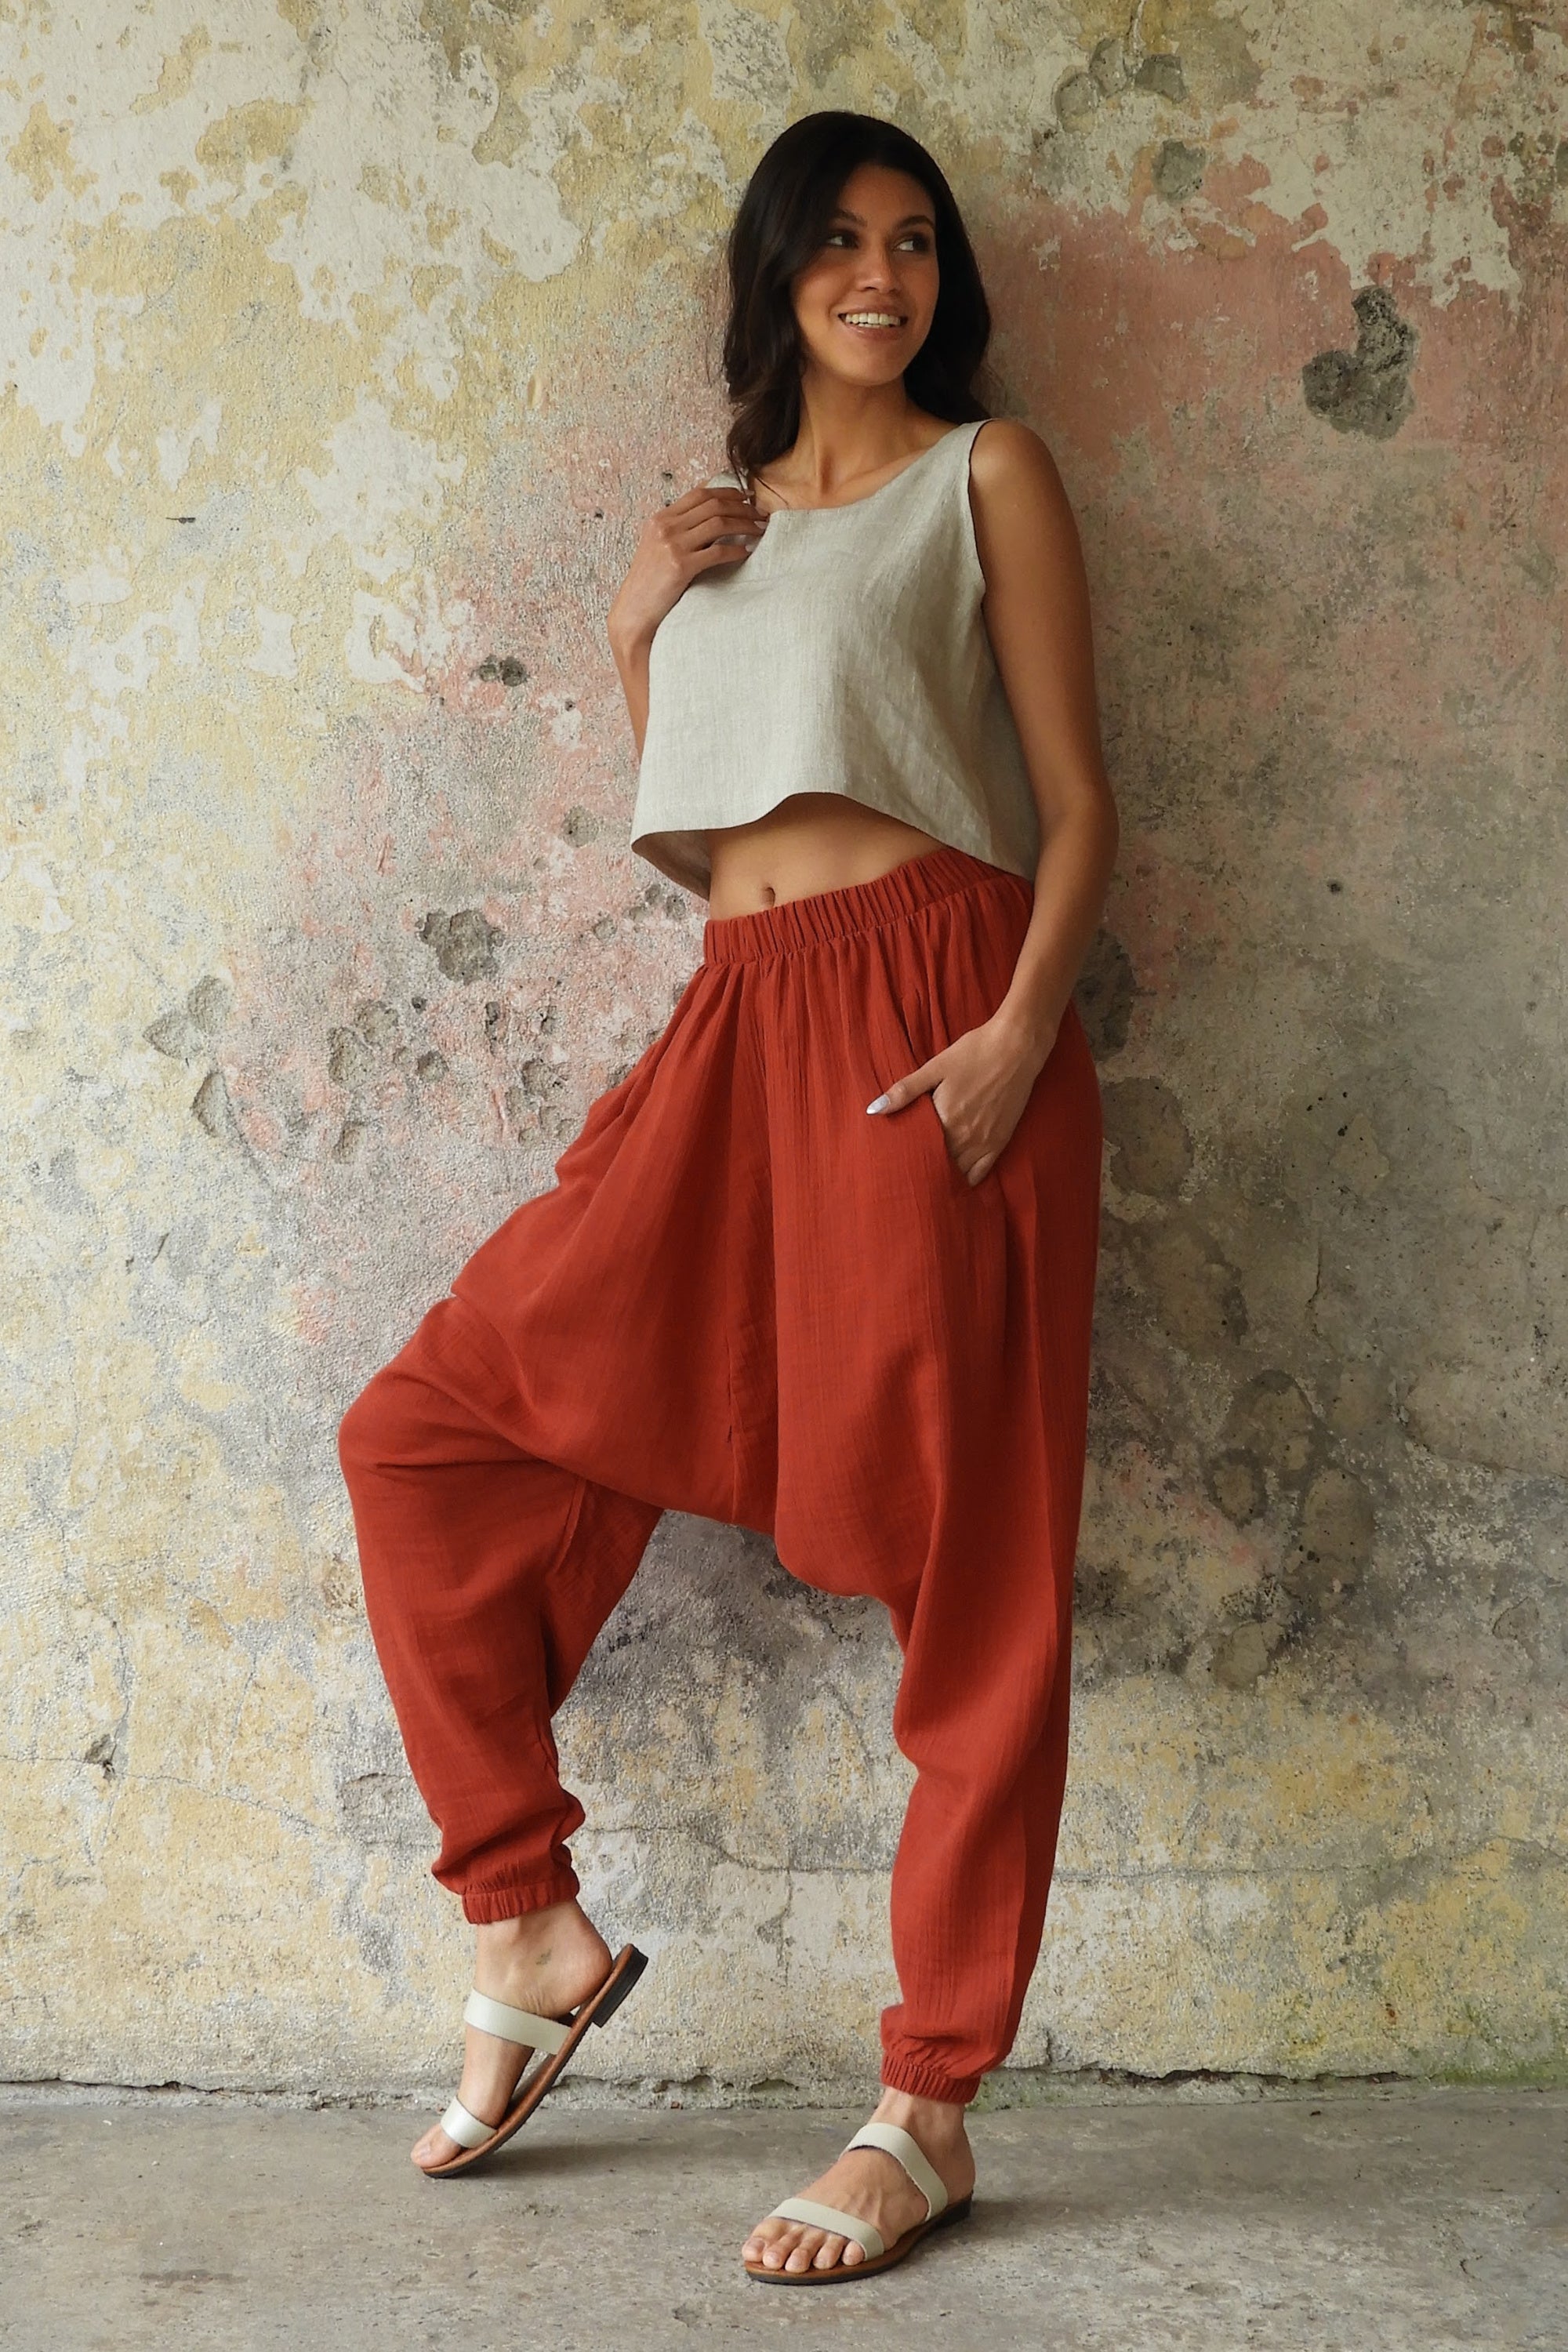 Buy Red & Peach Trousers & Pants for Girls by INDIWEAVES Online